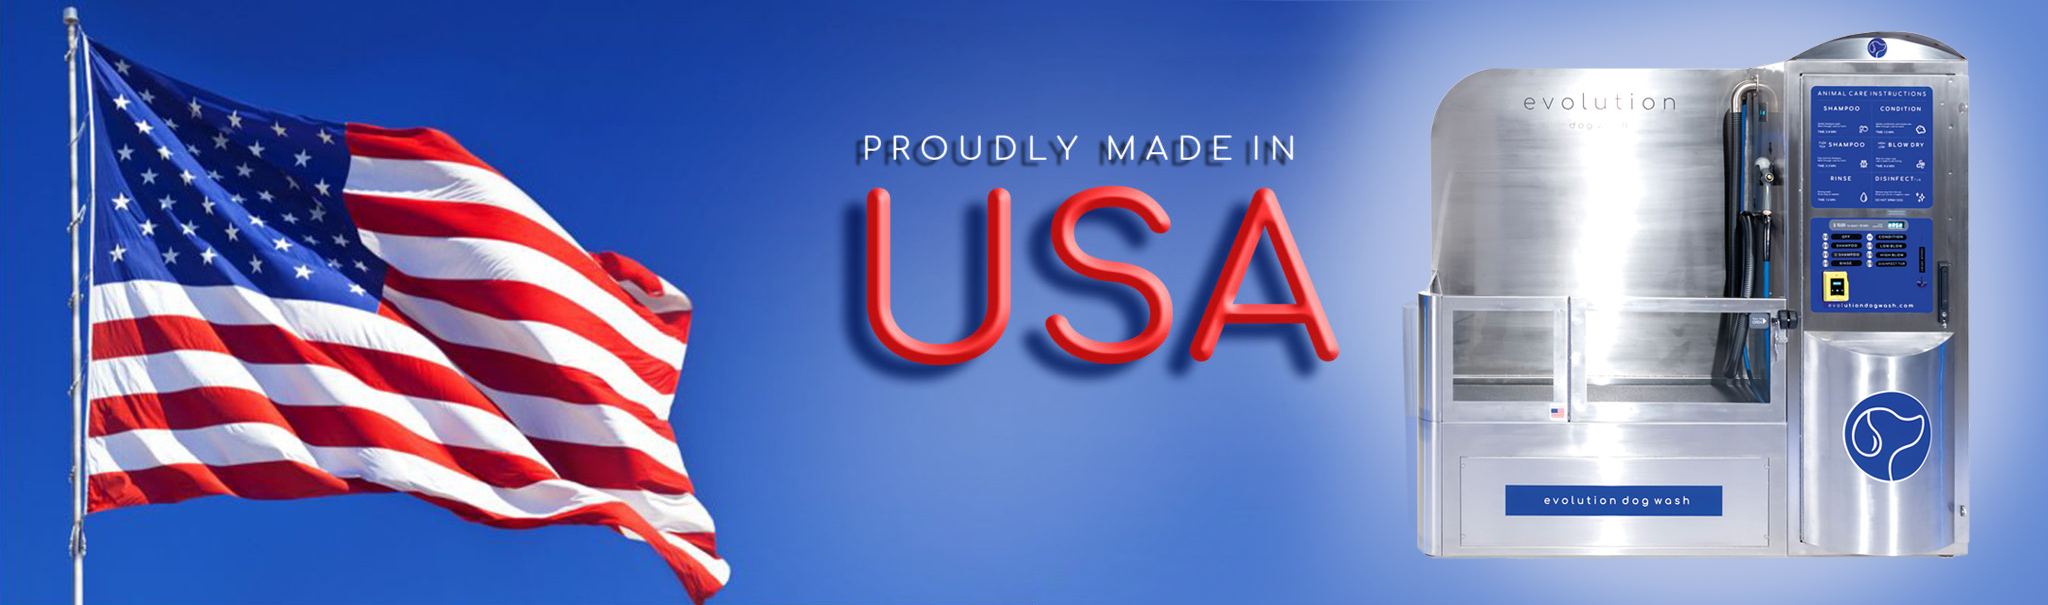 Evolution Dog Wash is proudly made in the USA.